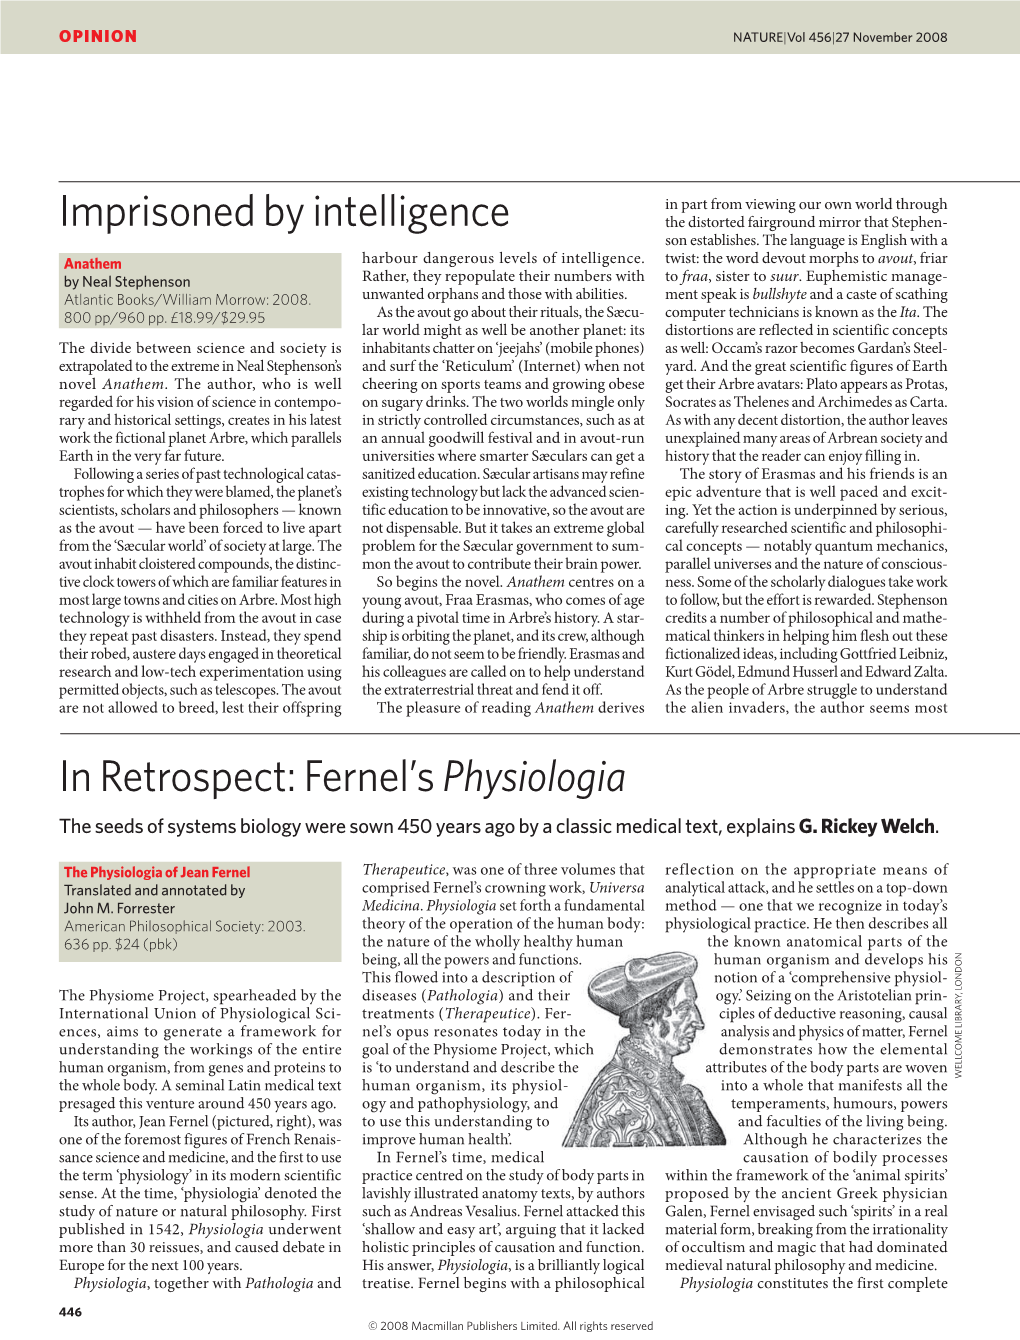 In Retrospect: Fernel's Physiologia